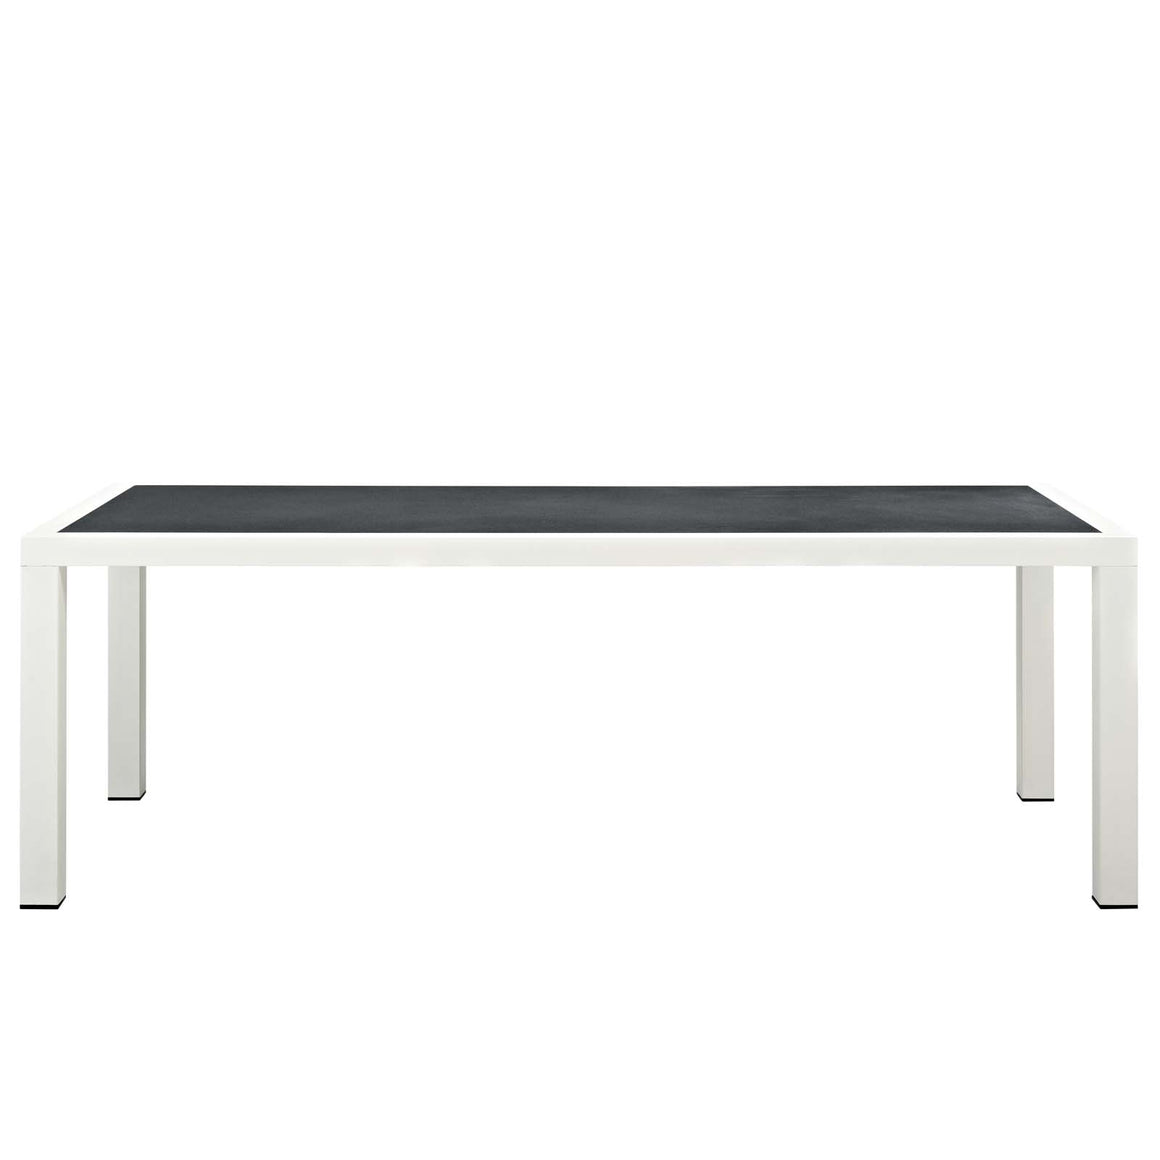 Stance 90.5" Outdoor Patio Aluminum Dining Table In White Gray